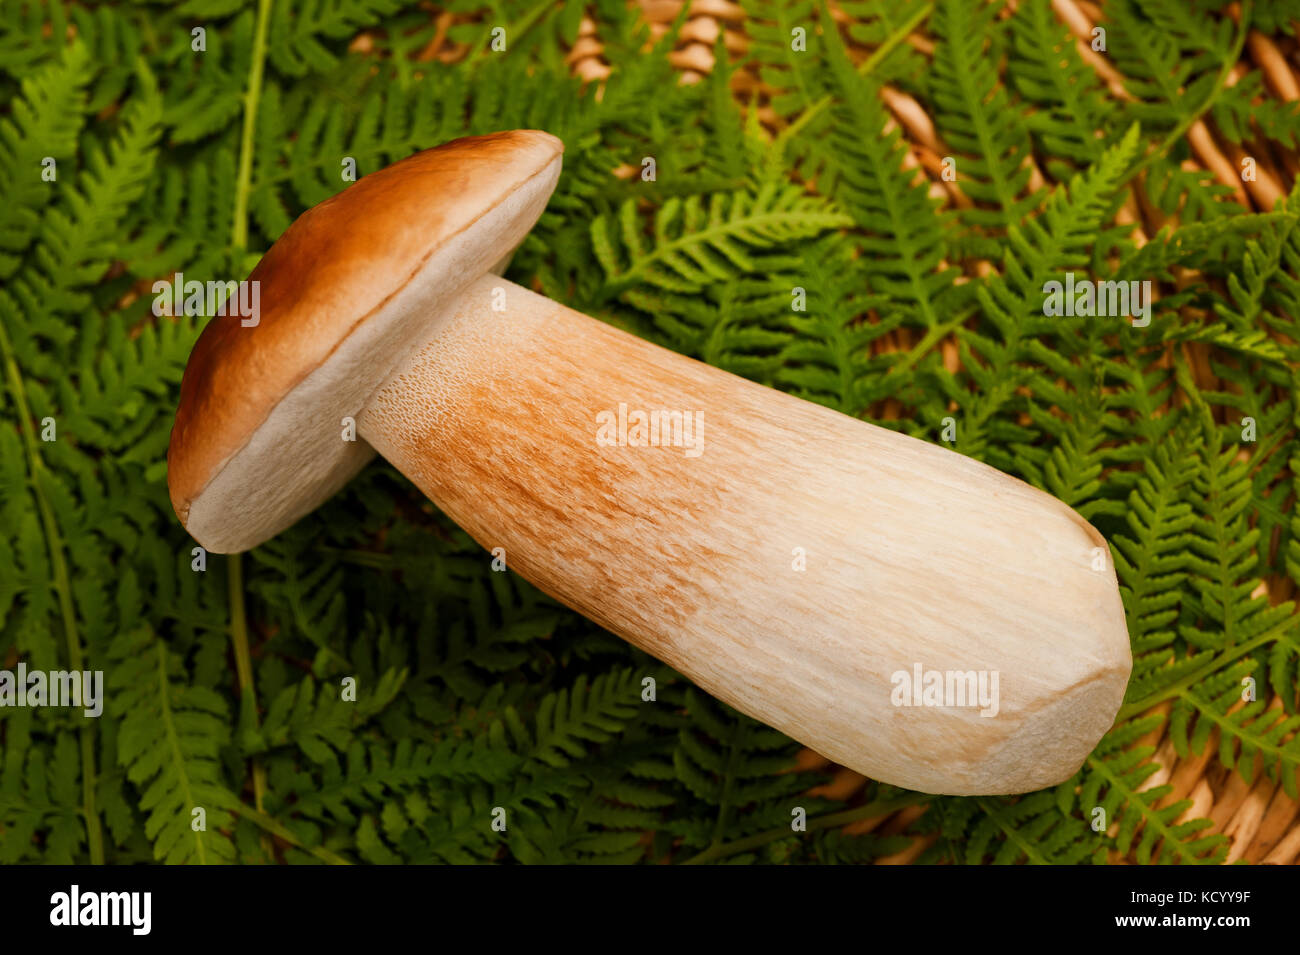 Mushroom in a basket with  ferns Stock Photo